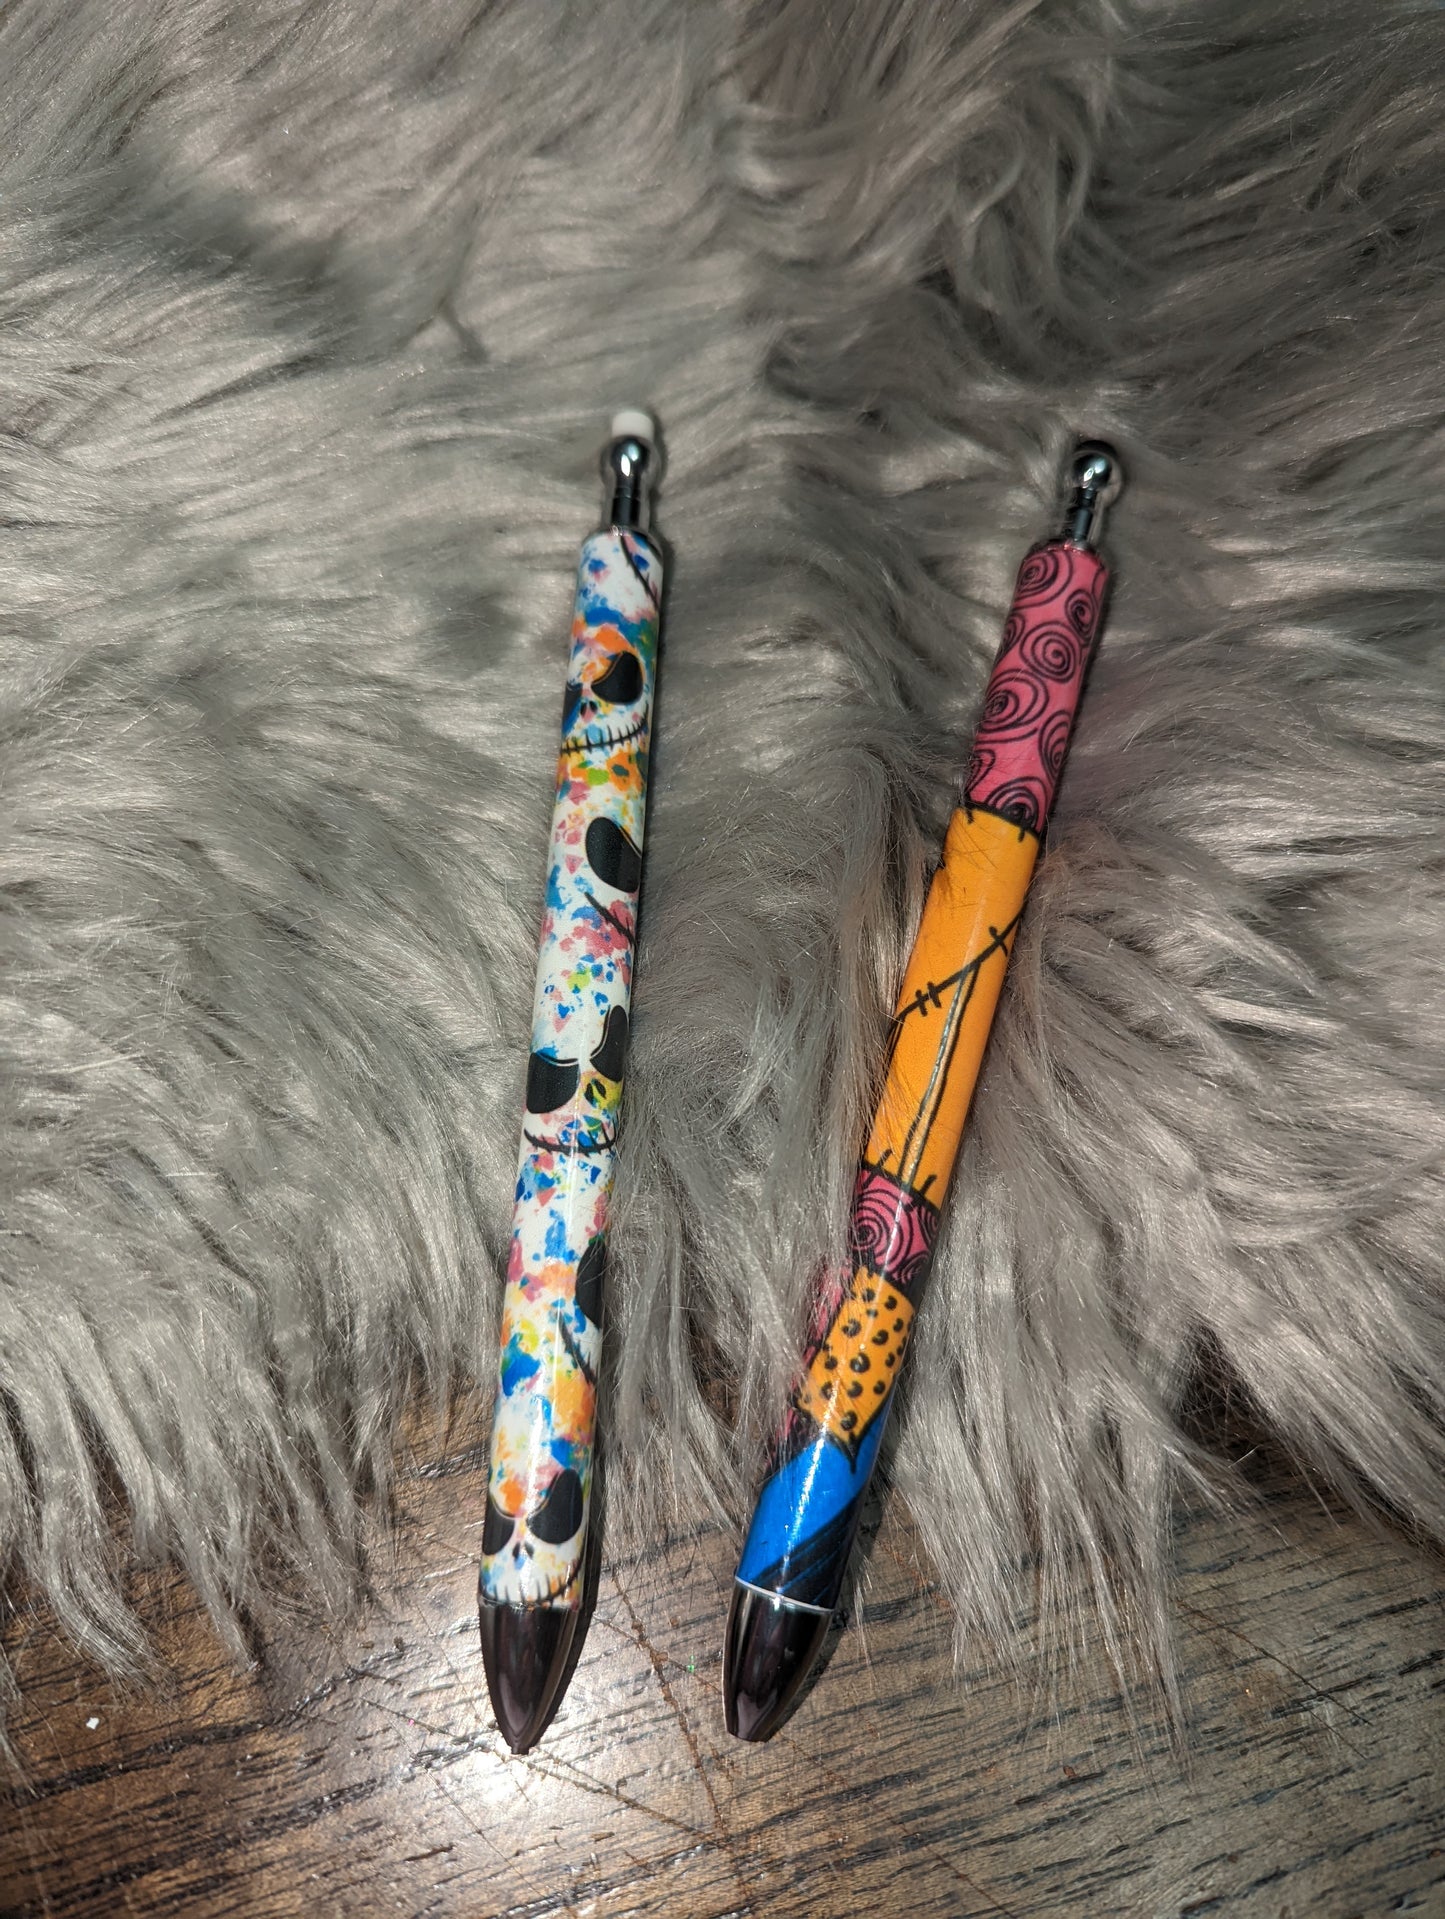 Two Color Glitter Ombre Customizable Pens and Mechanical Pencils